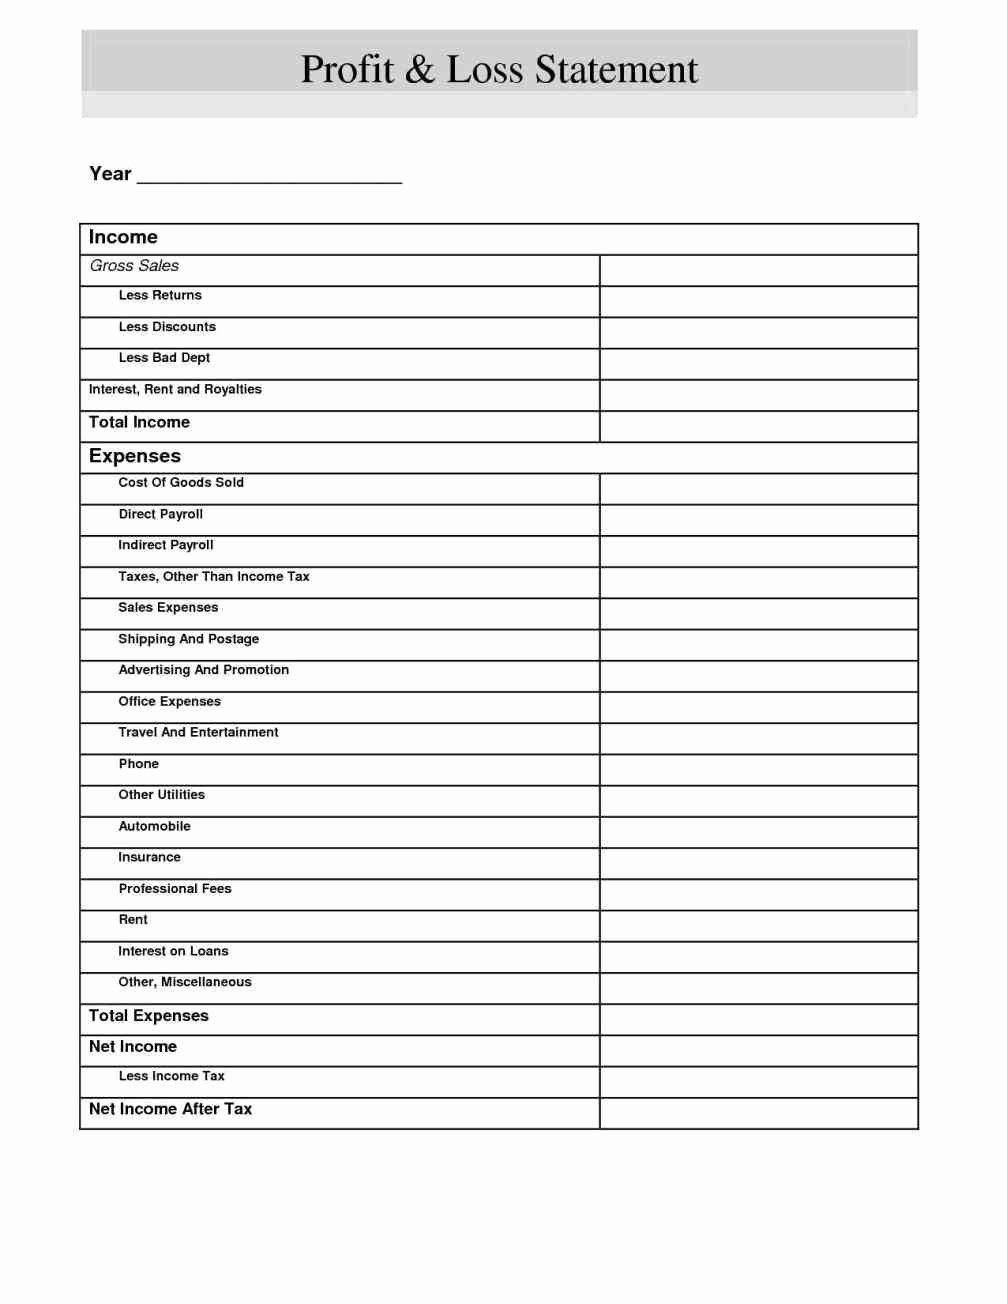 Free Profit and Loss Template Lovely Blank Profit and Loss Statement Pdf